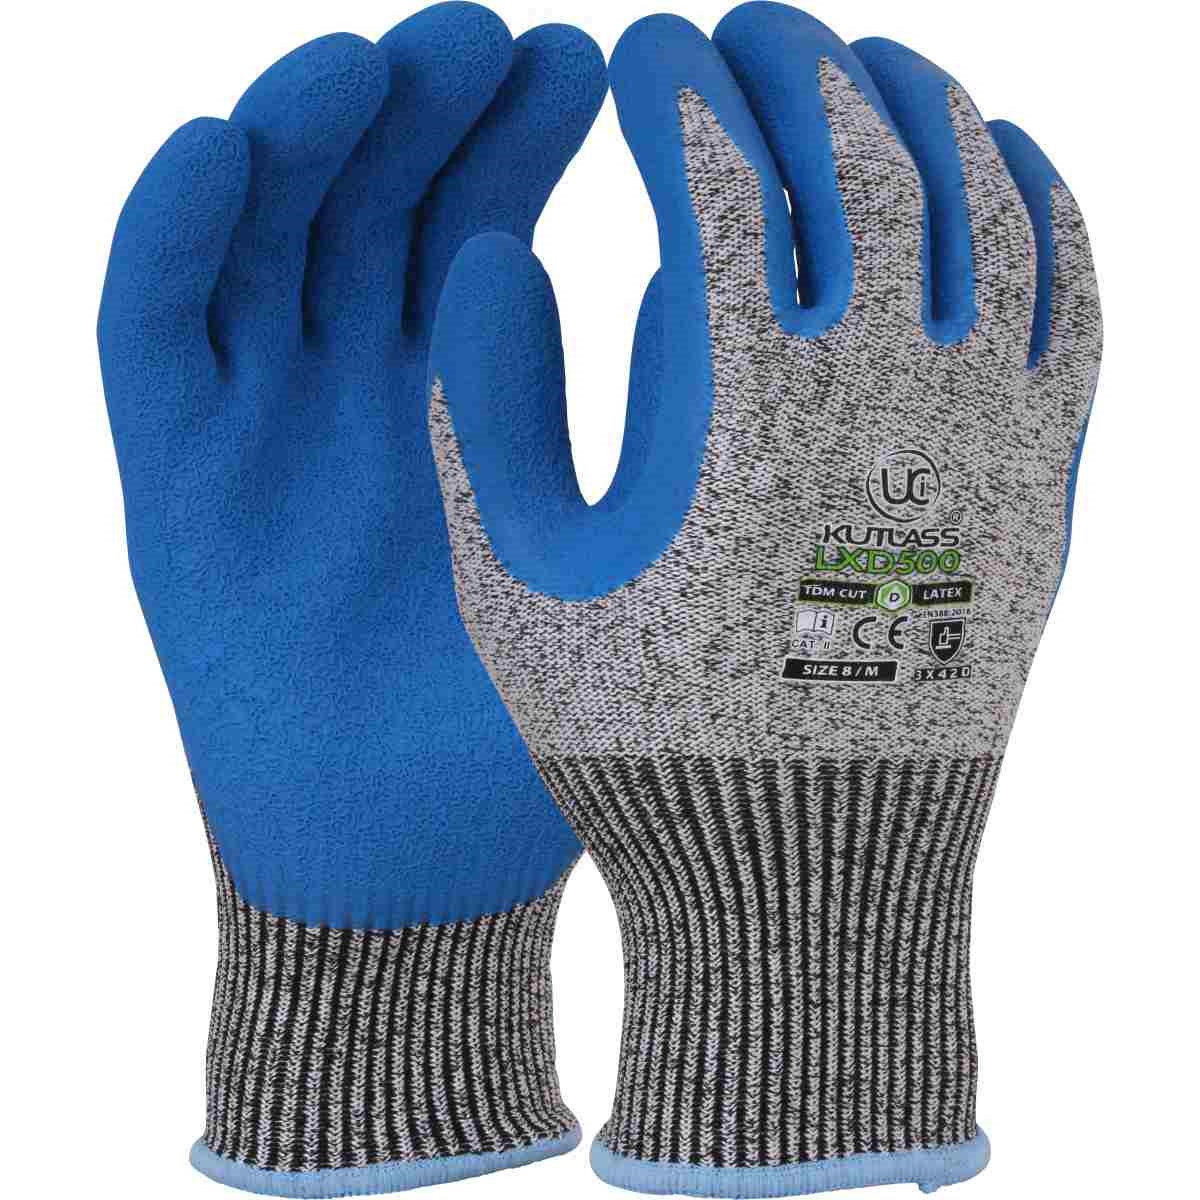 Hantex Cut Level C Glove - Knights Overall Protection